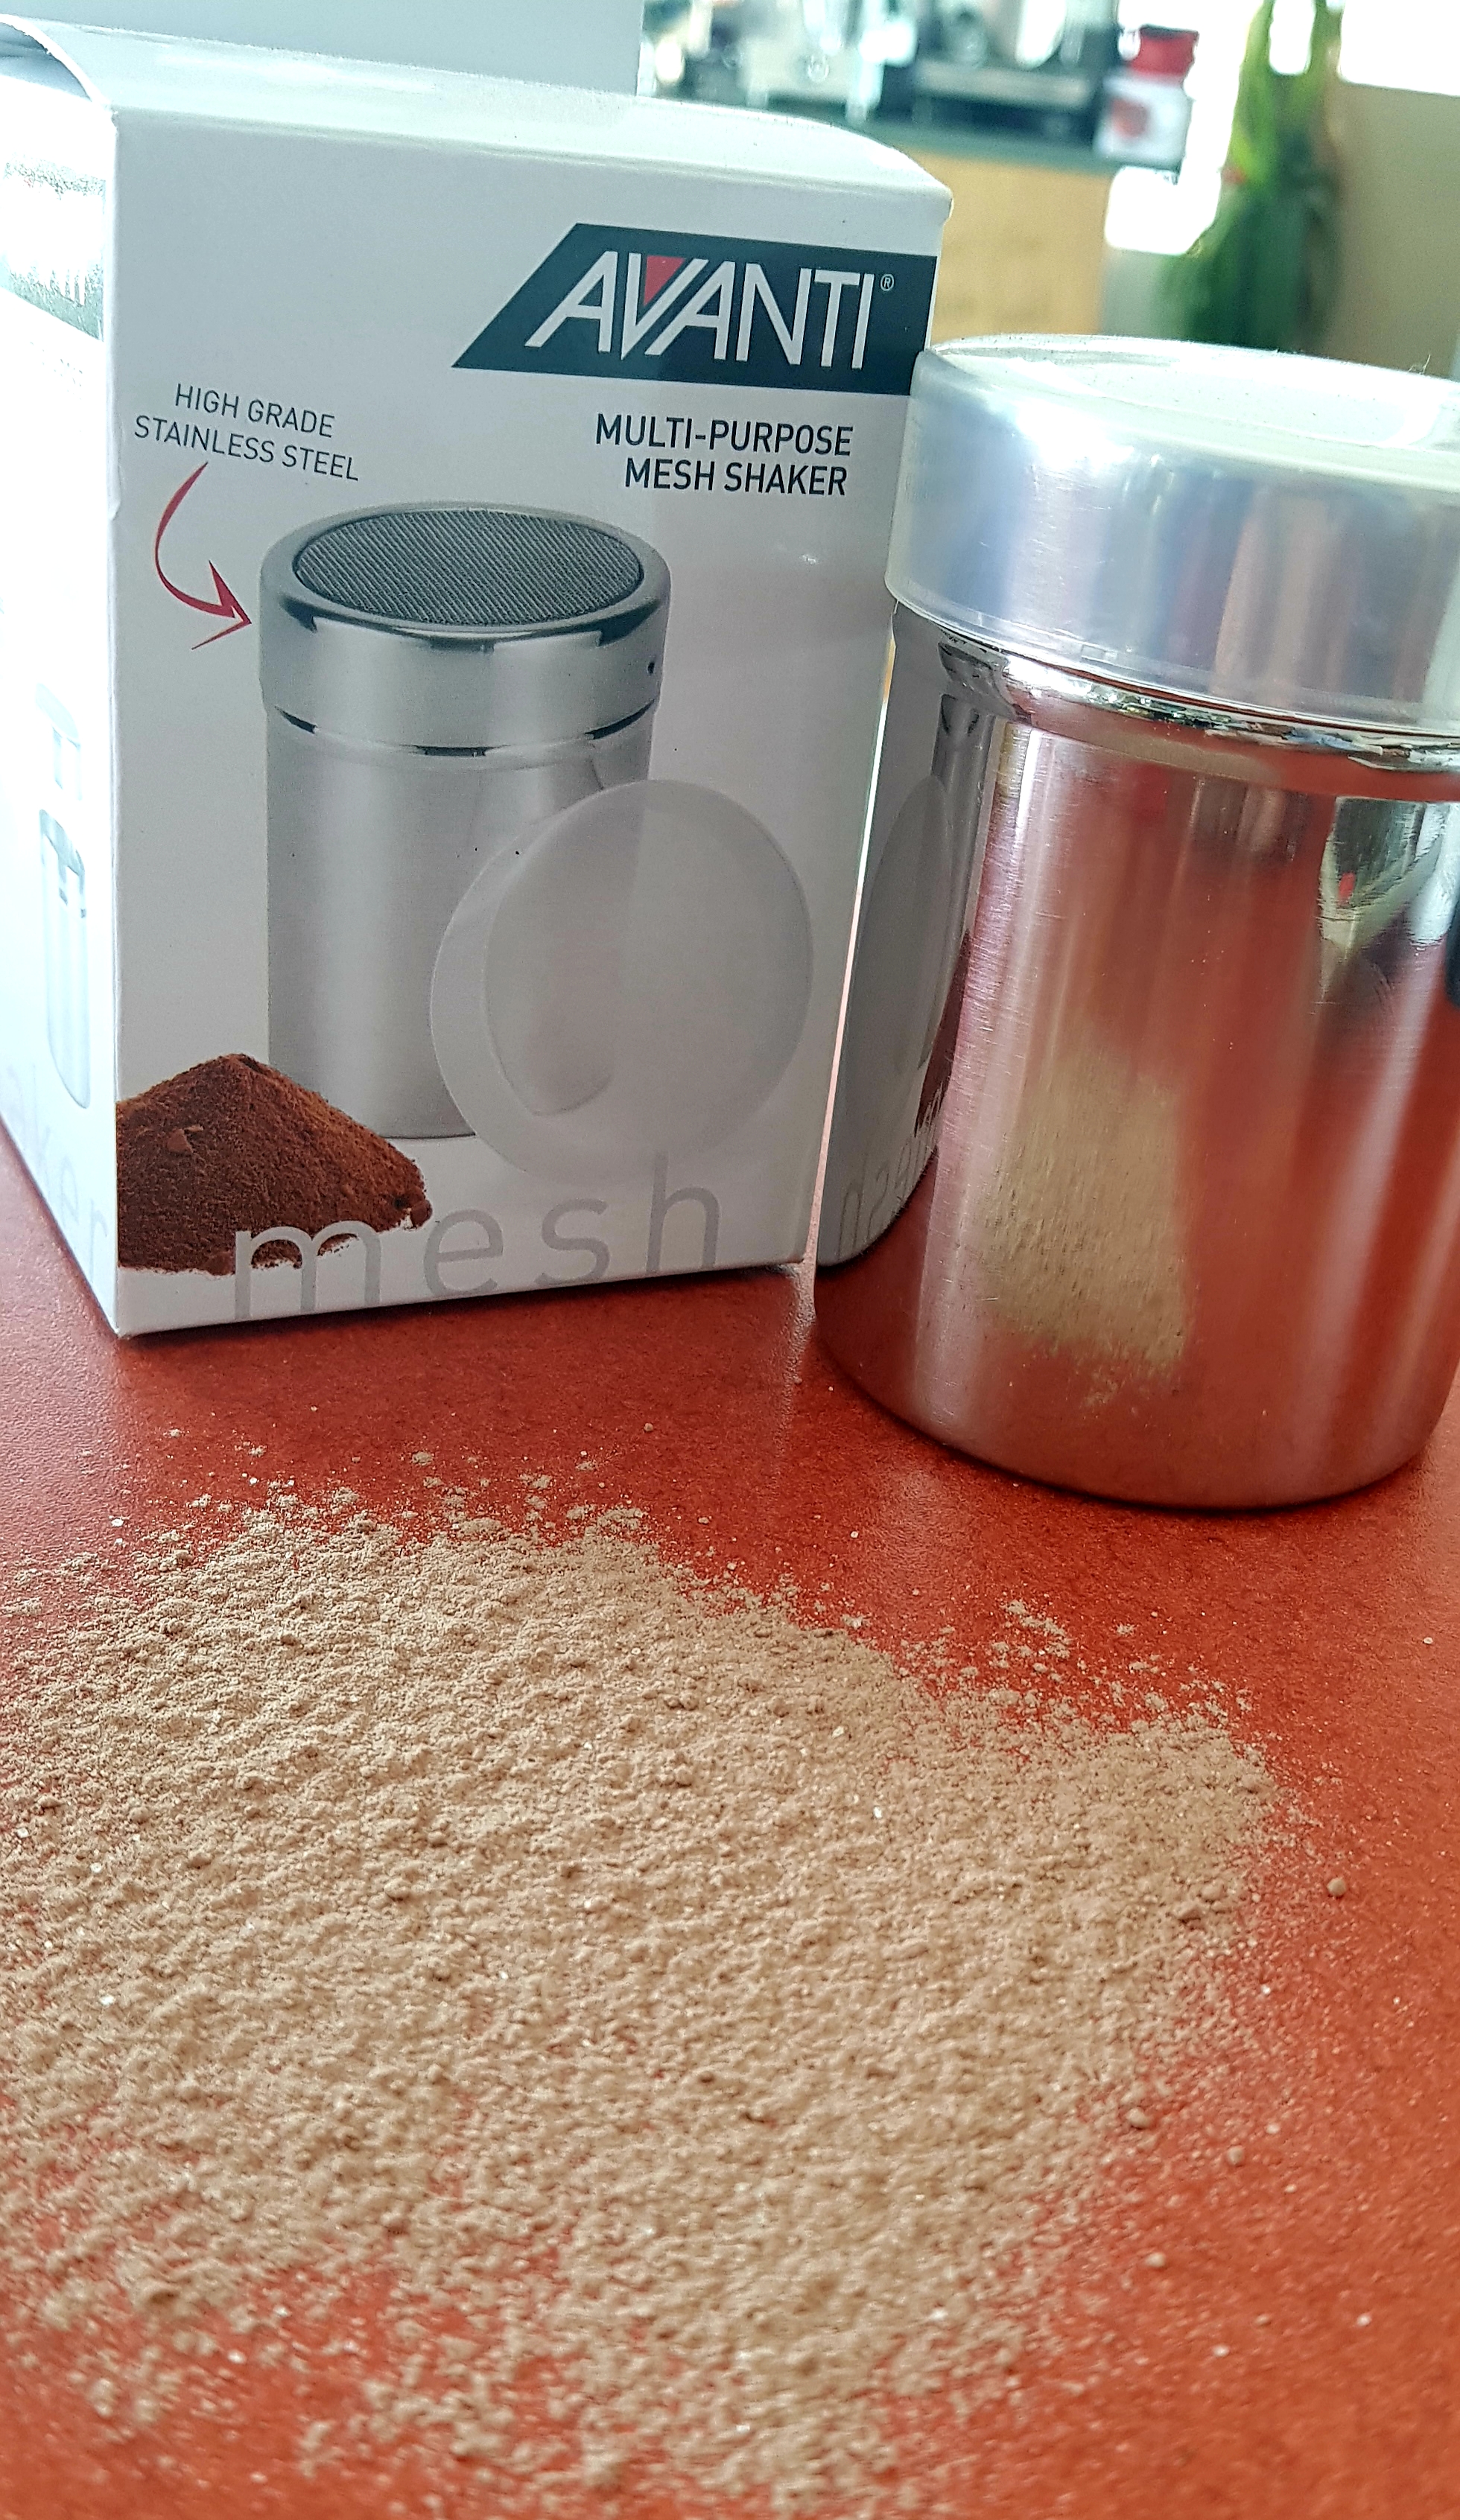 Honbay Stainless Steel Chocolate Shaker Icing Sugar Powder Cocoa Flour Coffee Sifter Cooking Tools Lid Chocolate Shaker Cocoa 